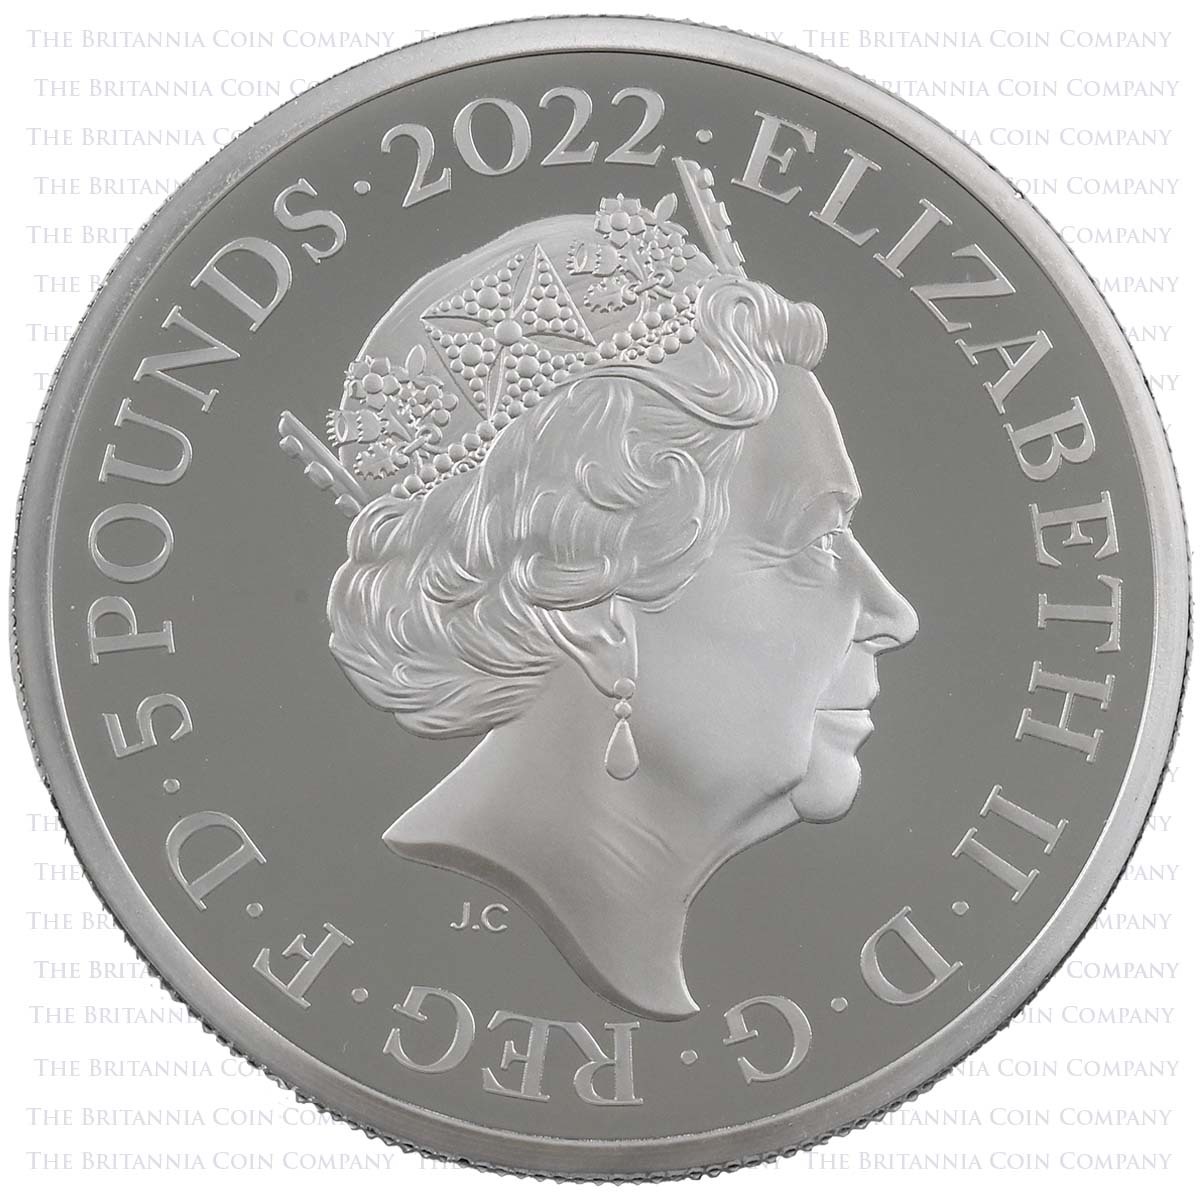 UK22H7S20 2022 British Monarchs Henry VII 2 Ounce Silver Proof Obverse